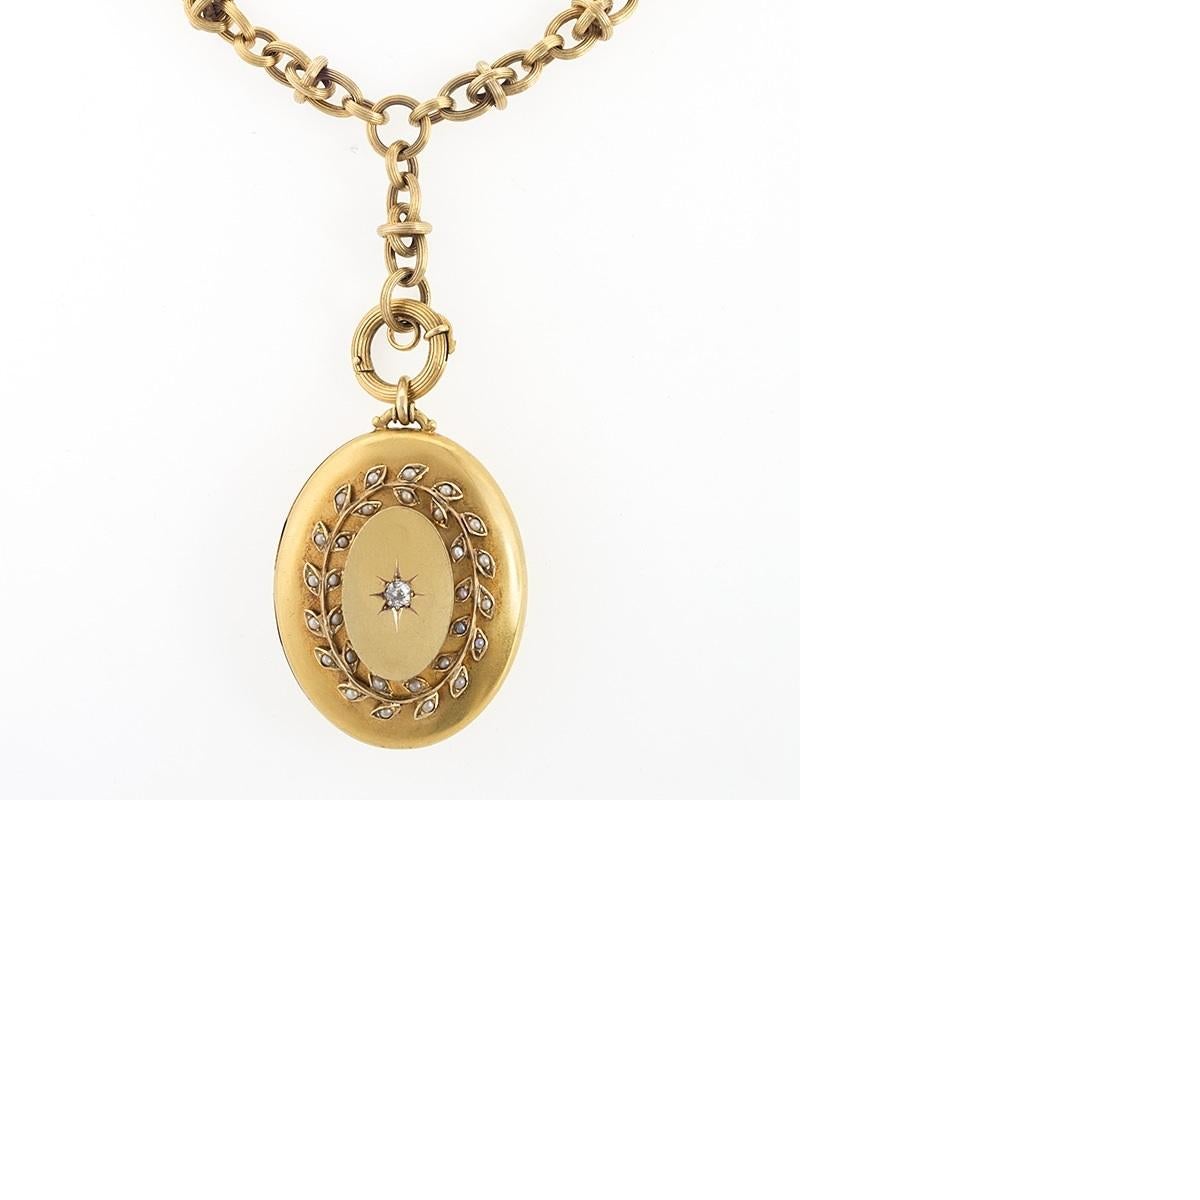 An English antique 18 karat gold pendant locket with diamonds. The pendant locket has 1 old mine-cut diamond with an approximate total weight of .18 carat, which is surrounded by a seed pearl-set garland.  The locket is suspended from an antique 18